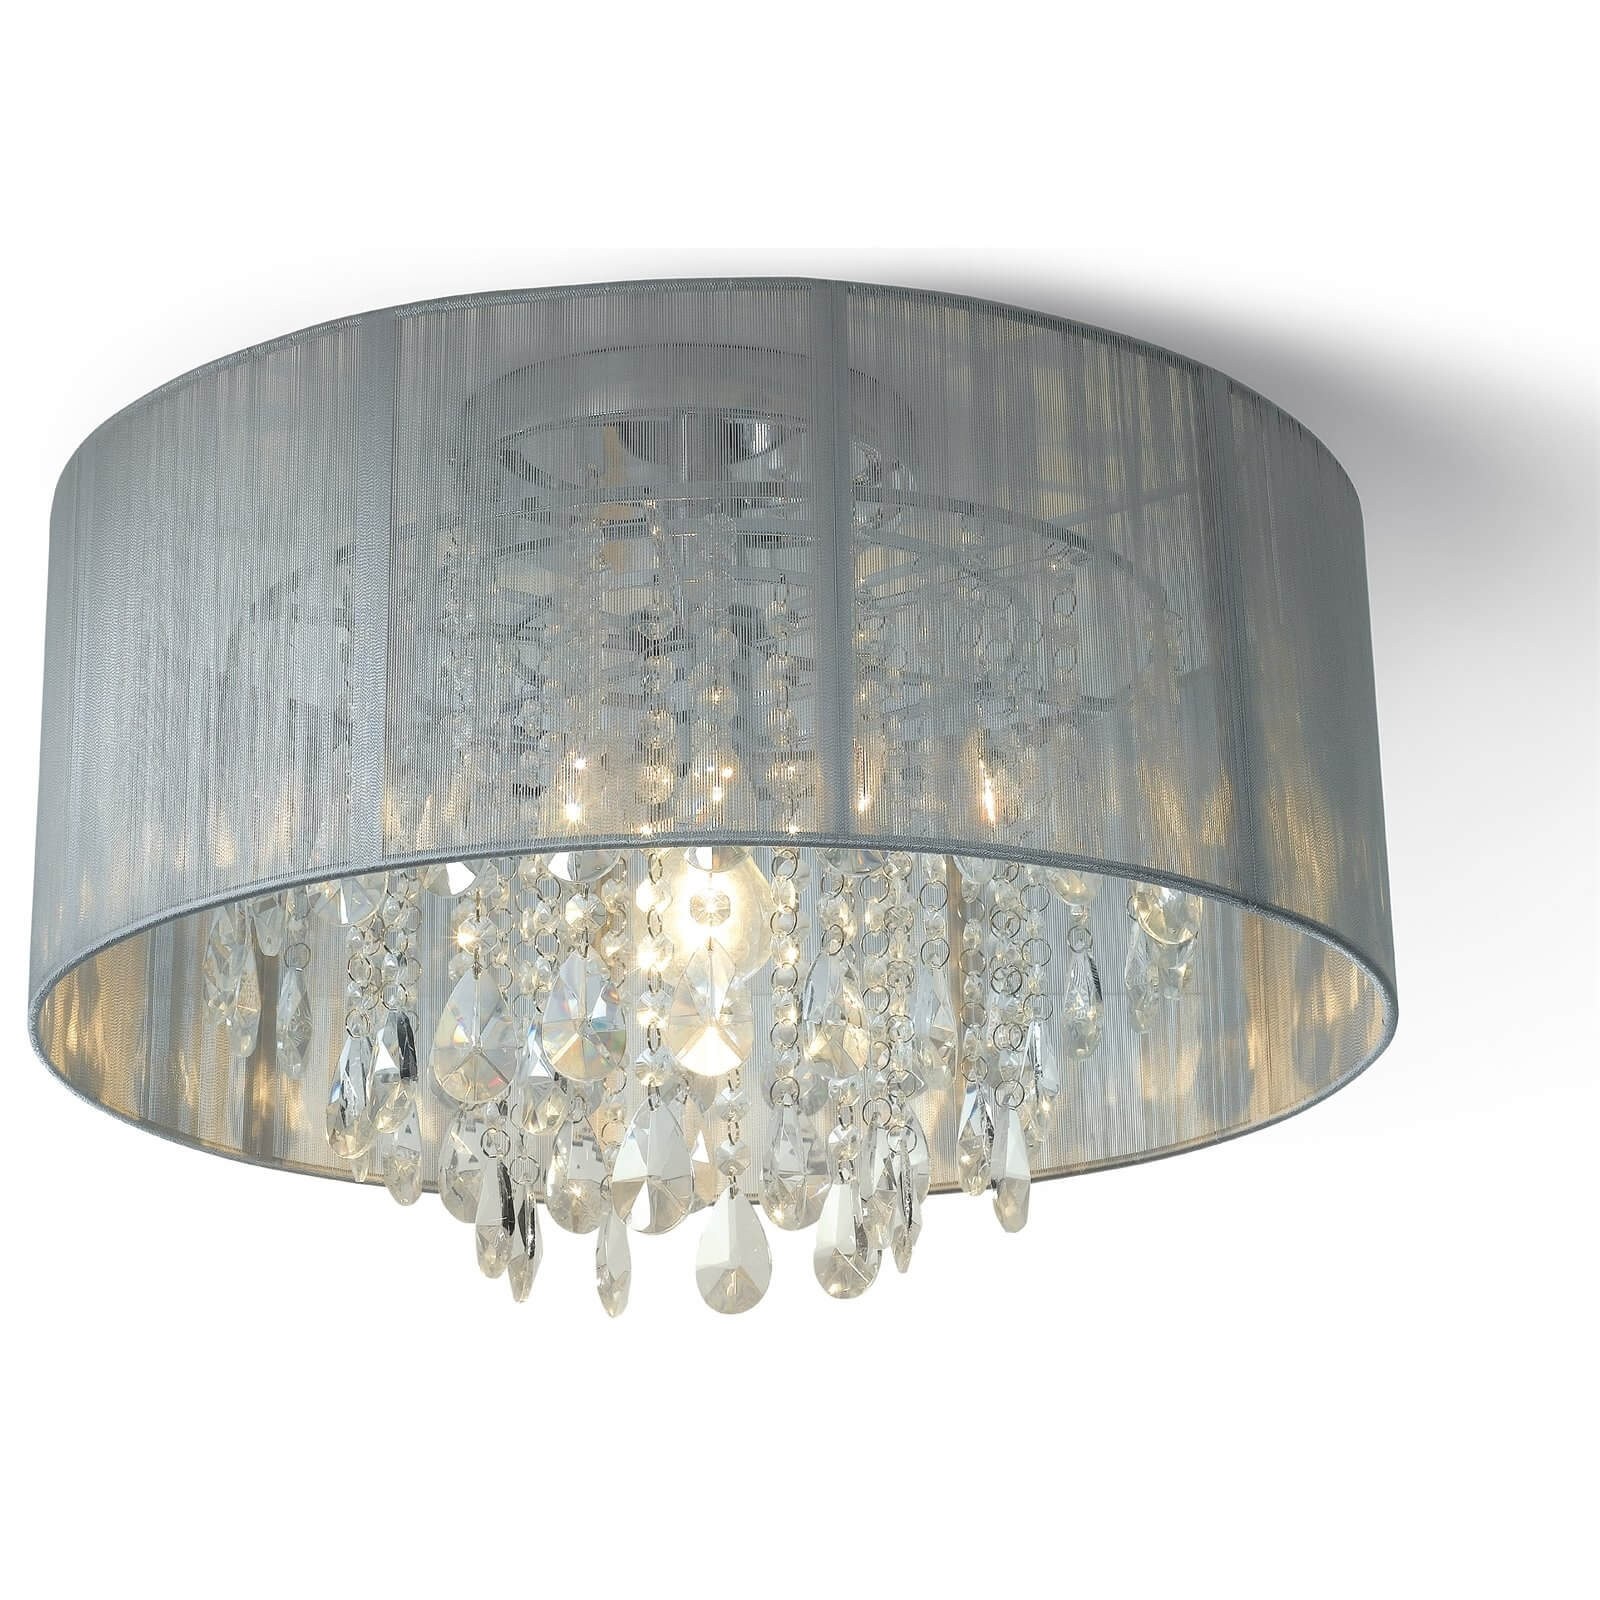 Whitworth Pendant Light with Glass Droplets